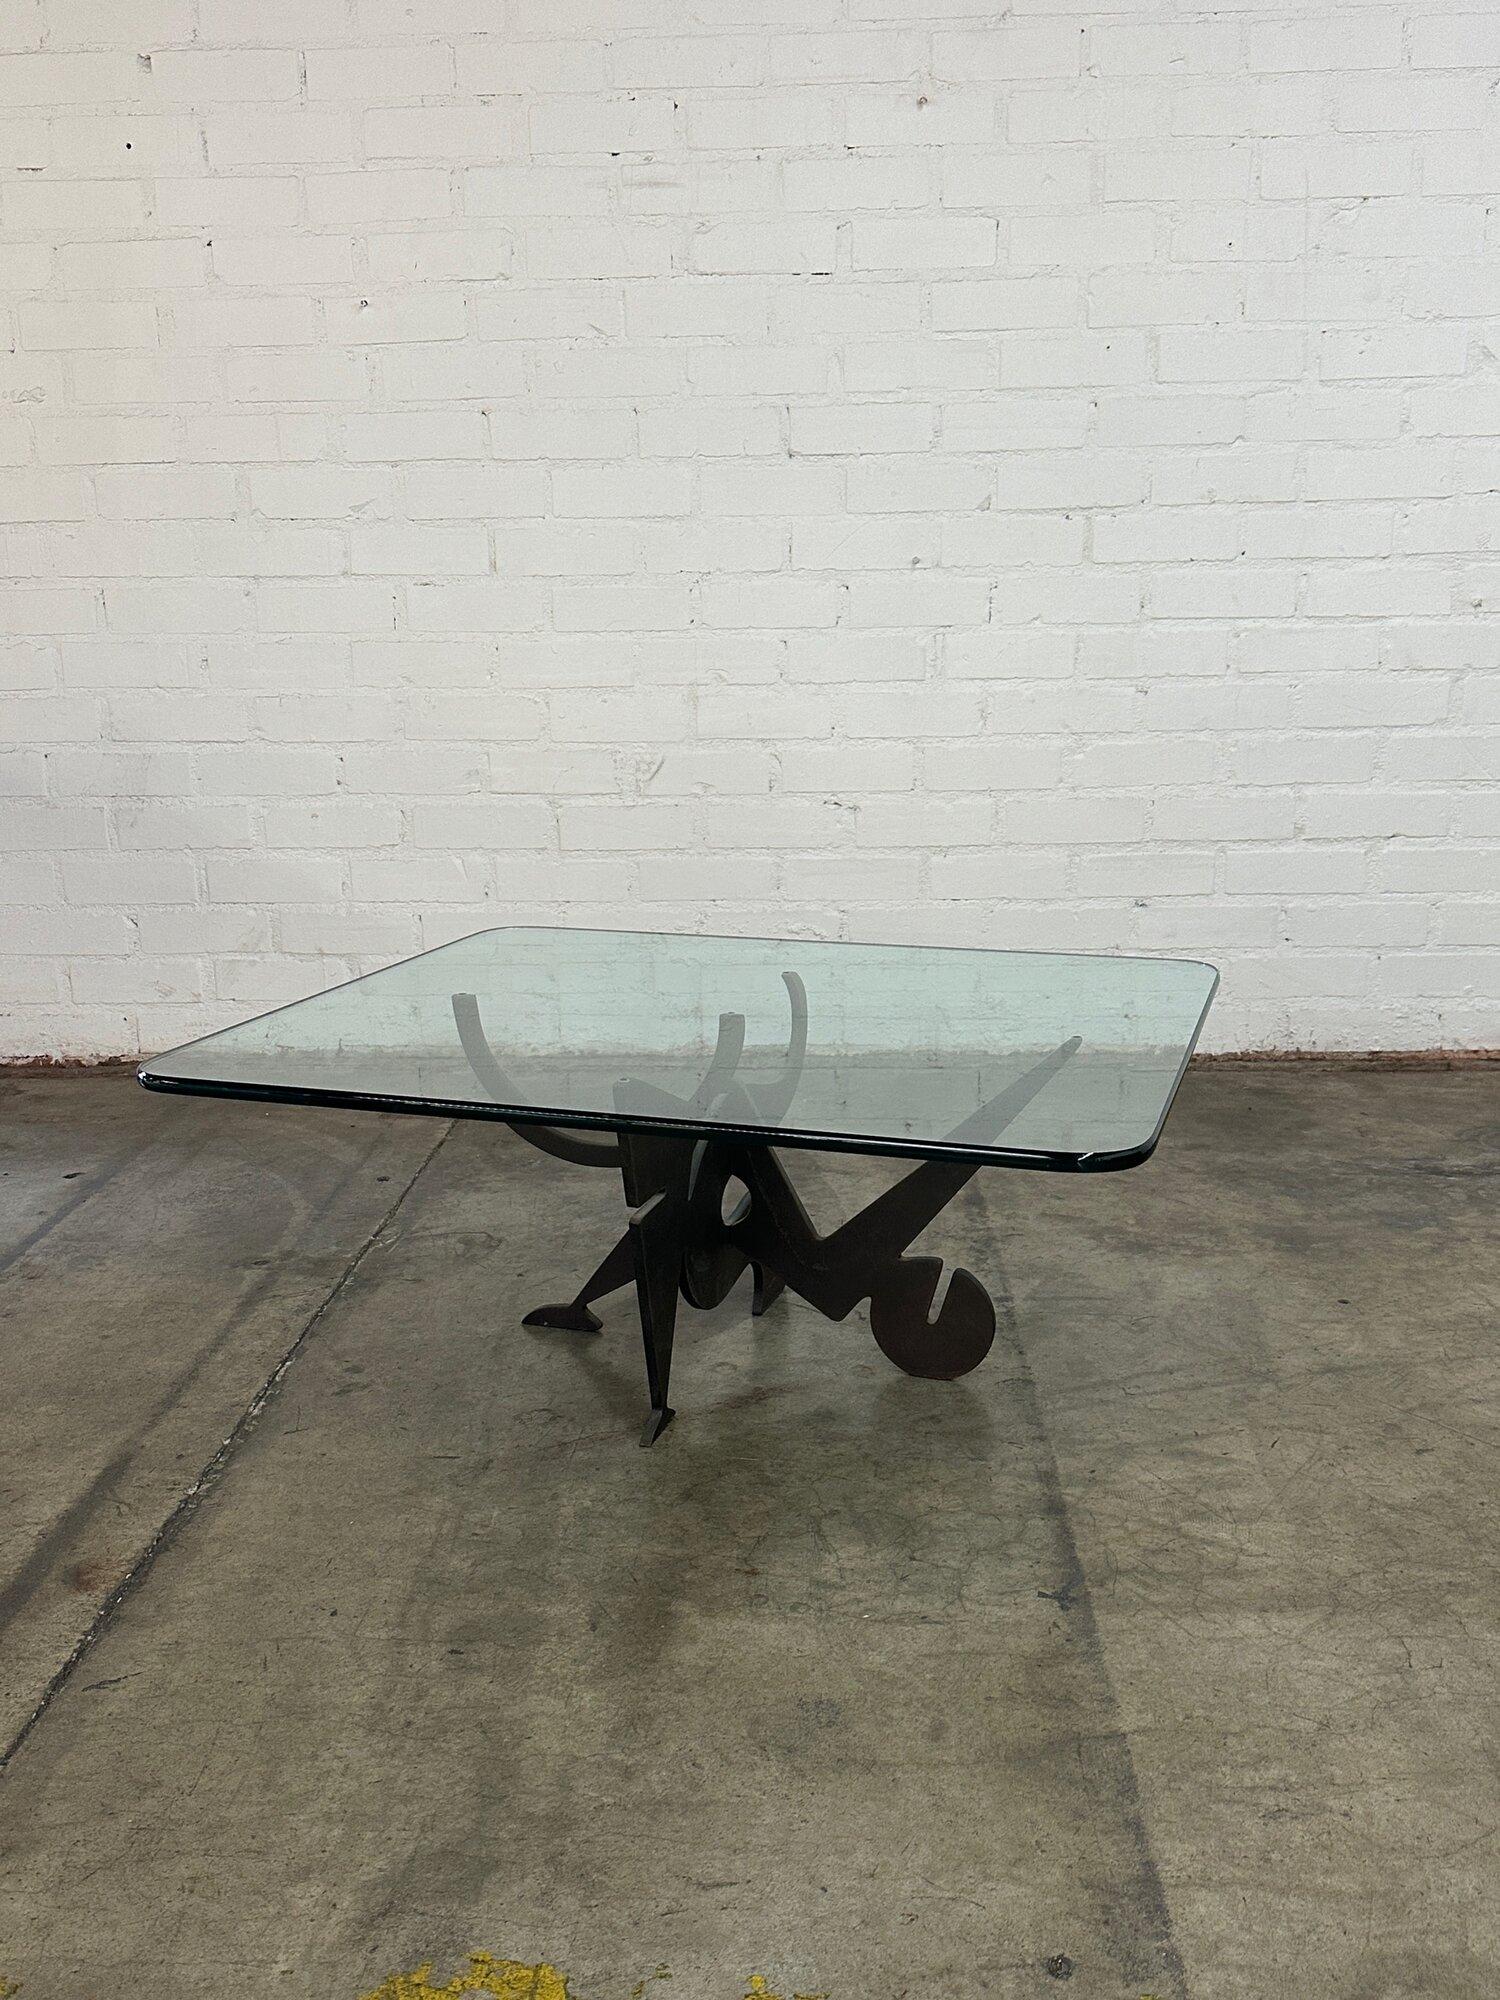 W42 D36 H17.5

Rare well preserved Post Modern French coffee table.  Table base interlocks two pieces of heavy thick iron. This glass surface is well preserved with no visible chips or breaks. 